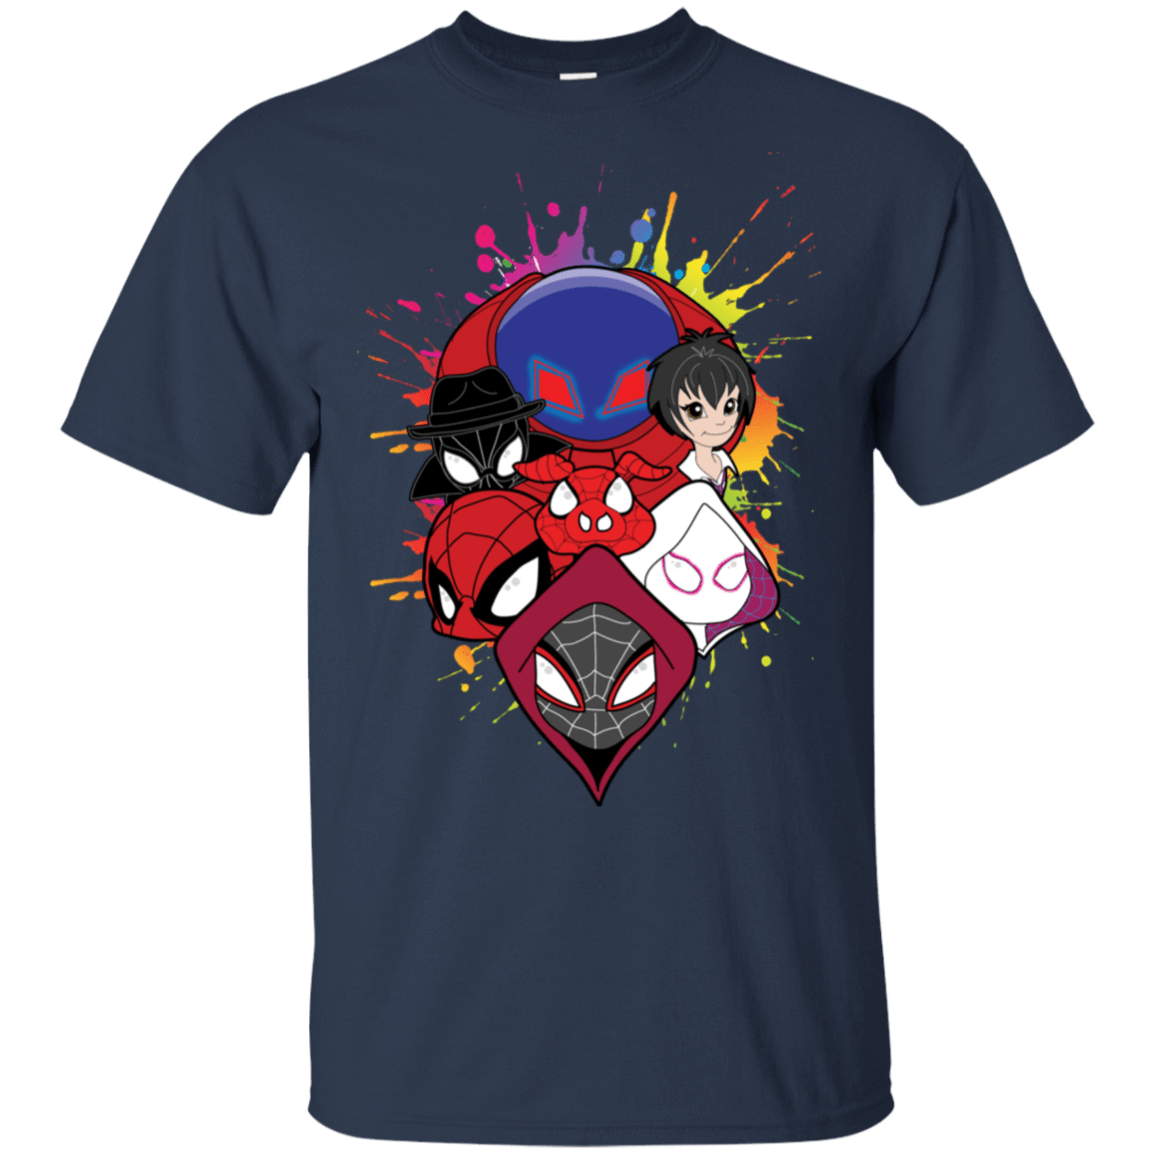 T-Shirts Navy / S Spiderverse T-Shirt